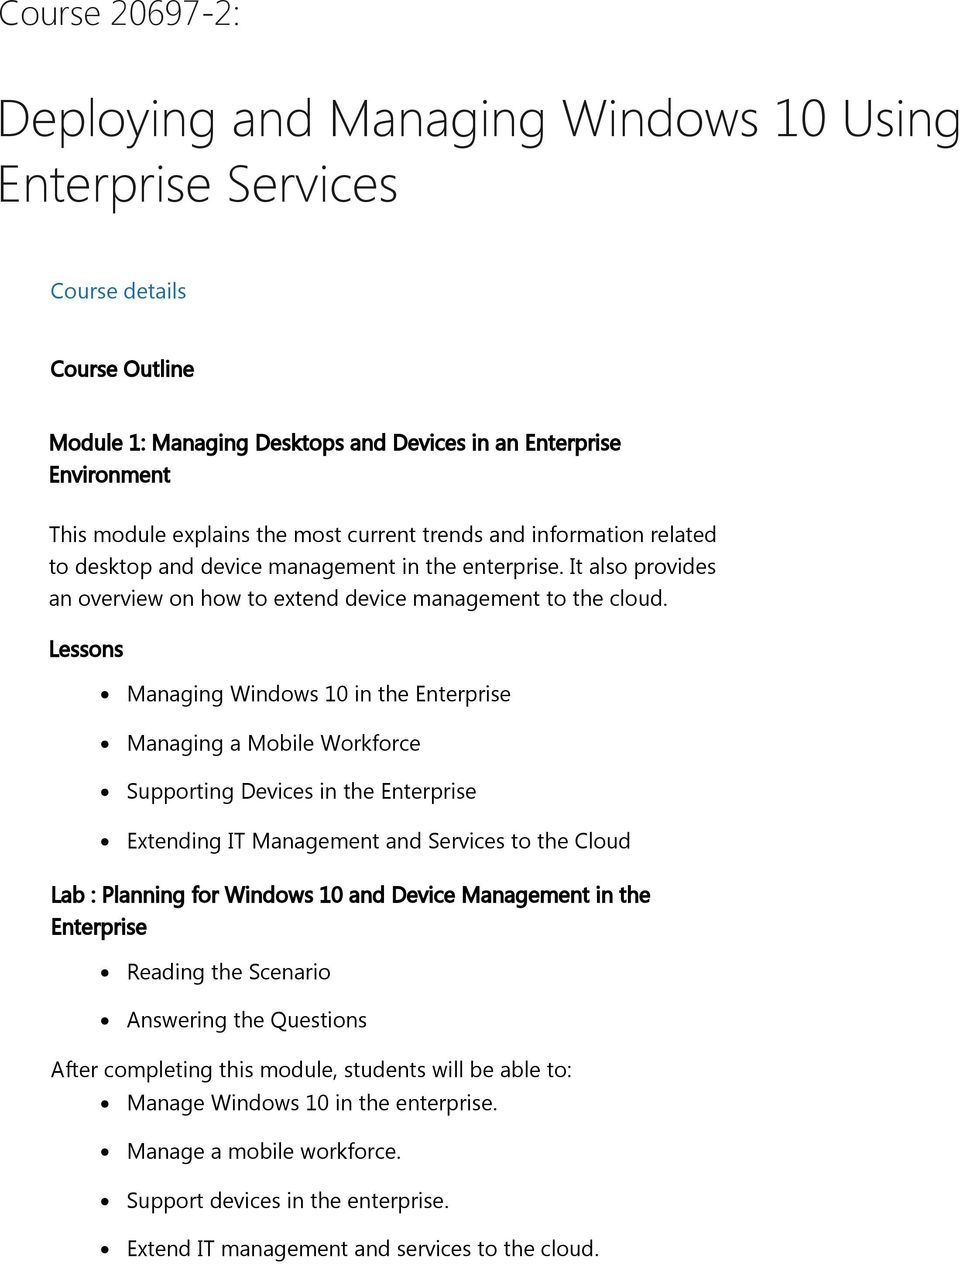 Managing Windows 10 in the Enterprise Managing a Mobile Workforce Supporting Devices in the Enterprise Extending IT Management and Services to the Cloud Lab : Planning for Windows 10 and Device